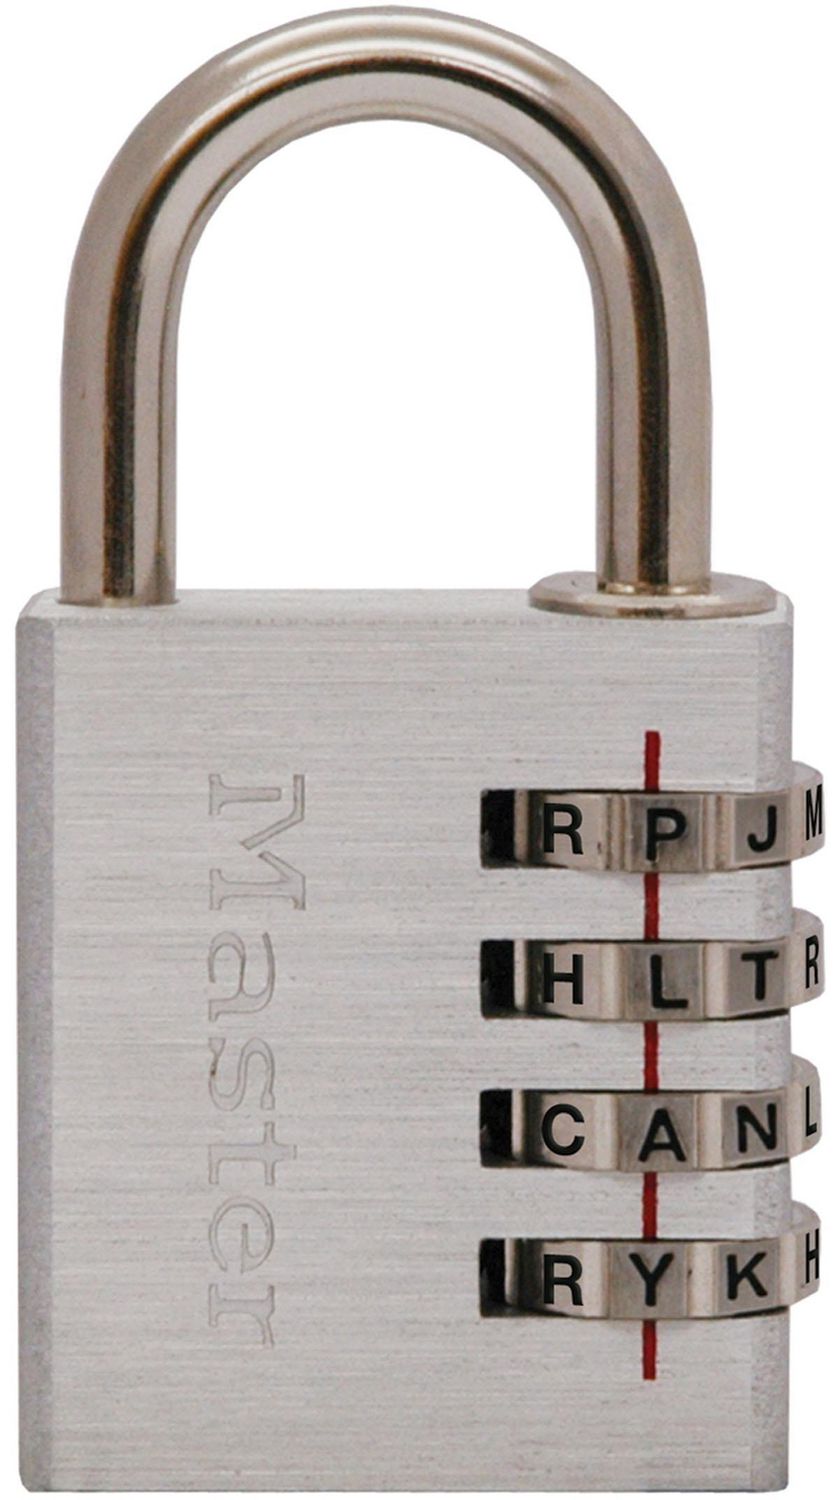 small padlock with code